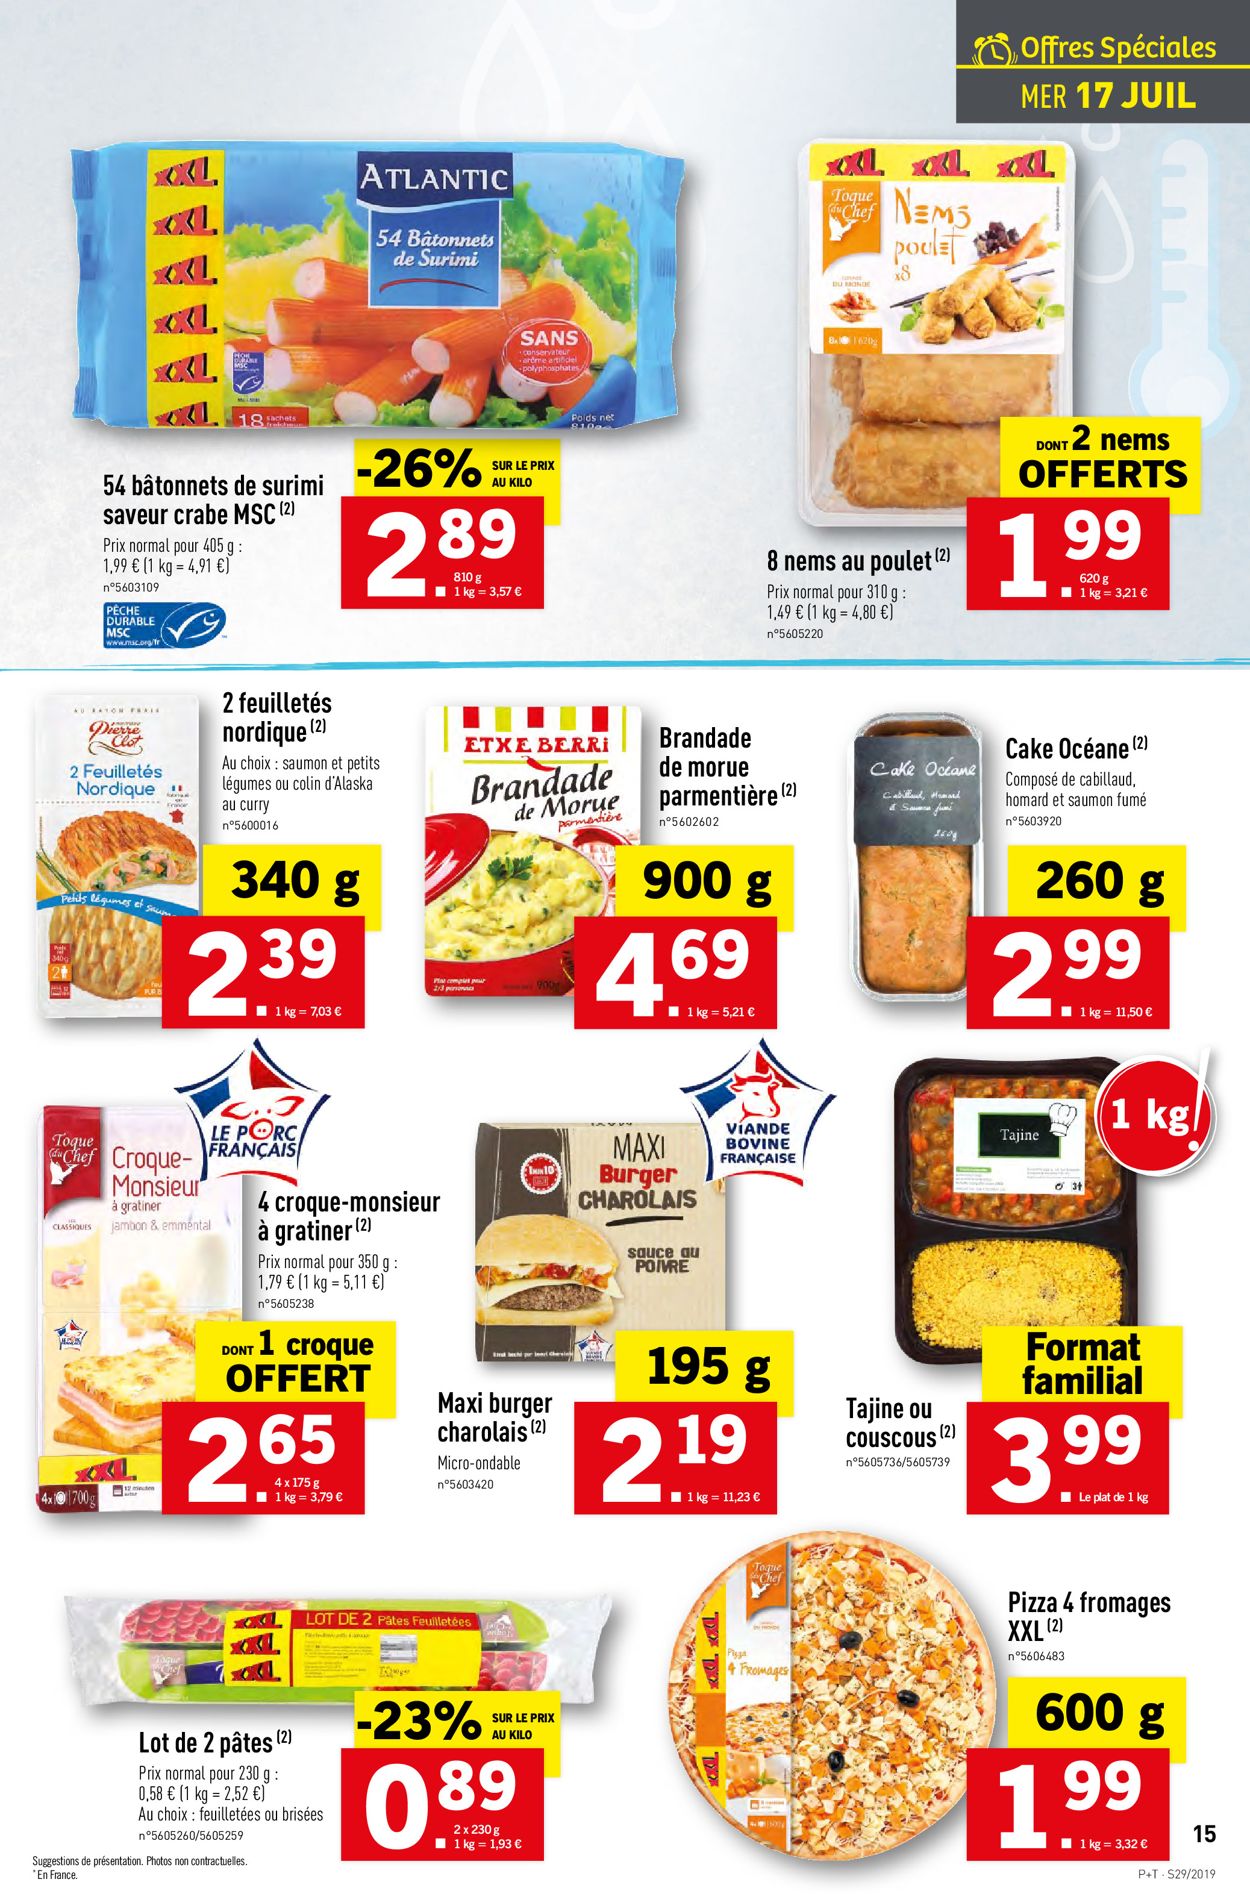 Lidl Catalogue - 17.07-23.07.2019 (Page 15)